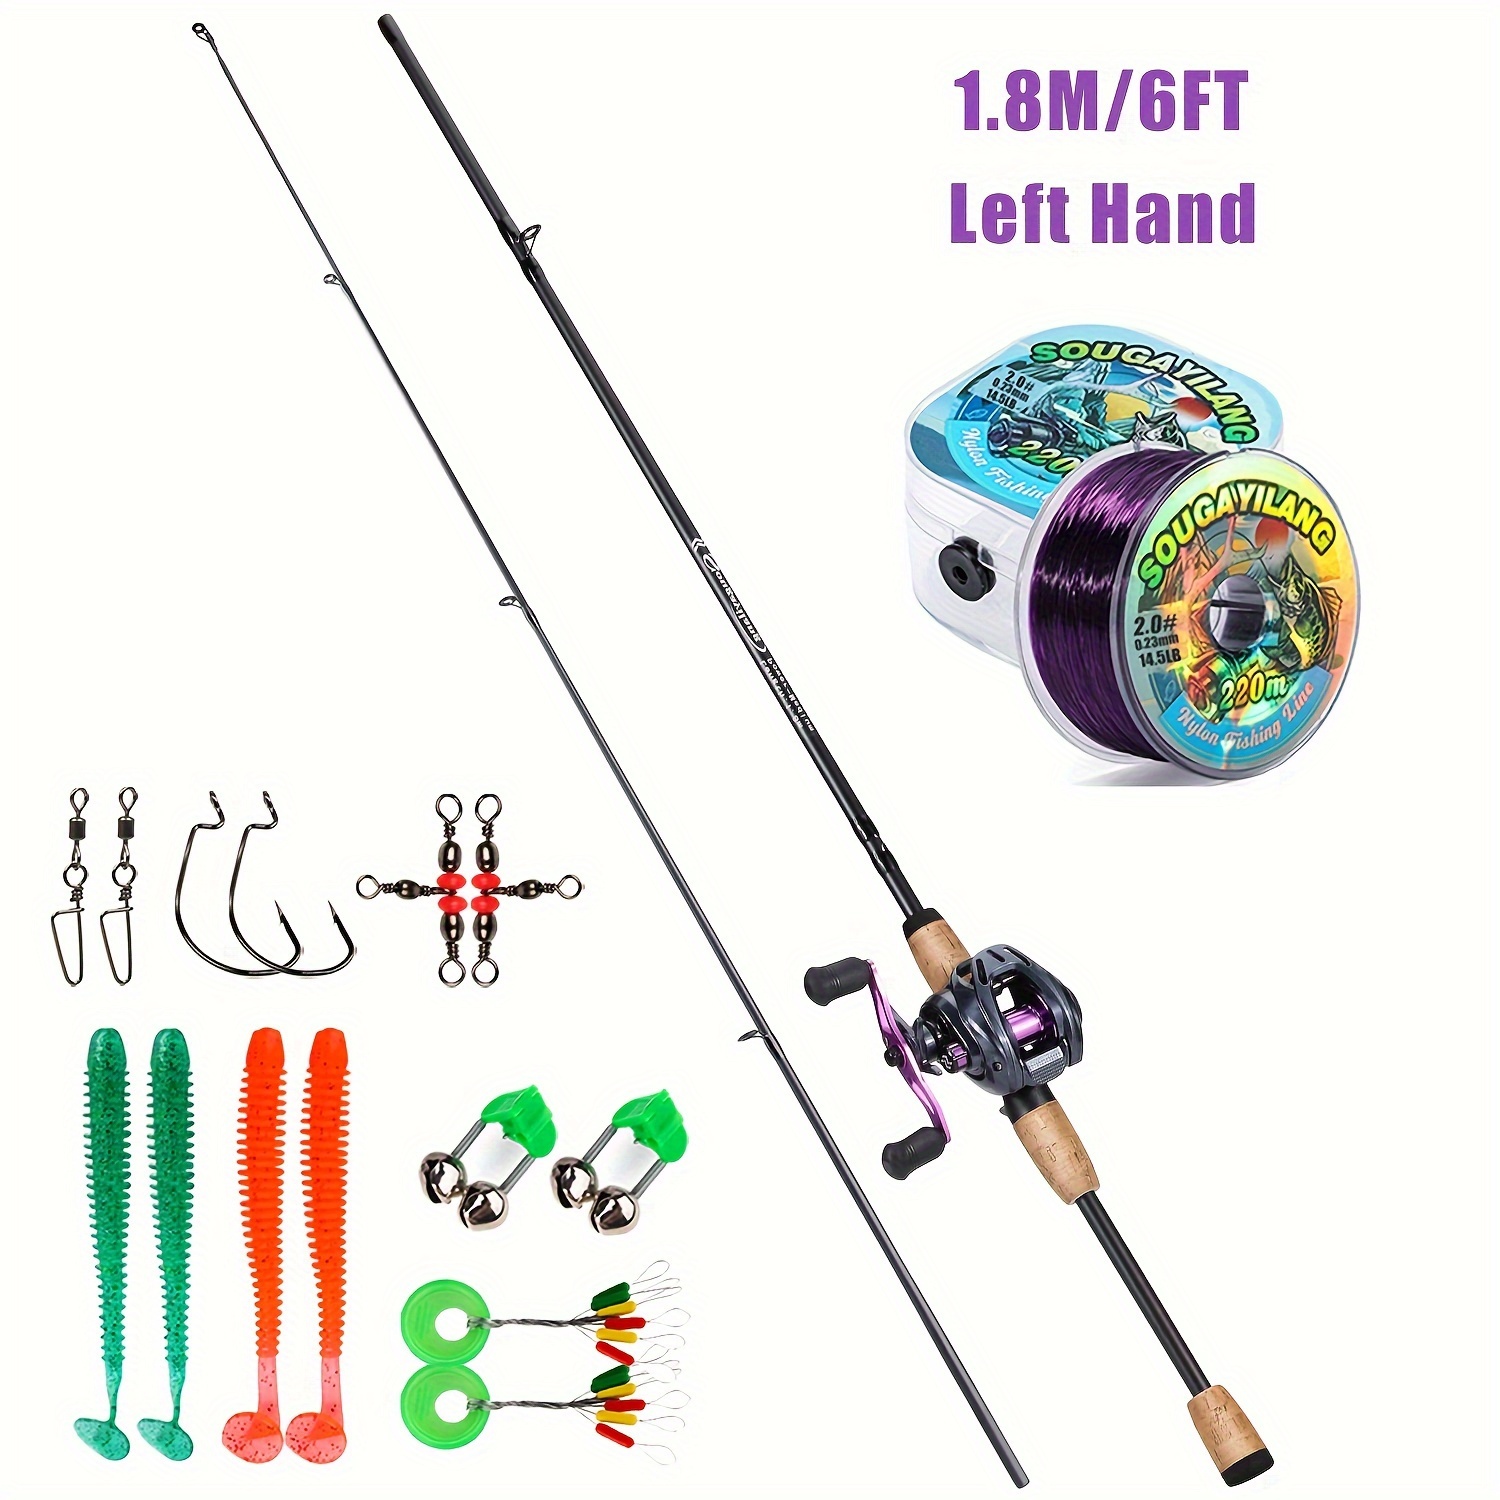 Sougayilang Fishing Rod And Reel Combo, 2 Sections Ultralight Carbon  Casting Fishing Rod, 7.2:1 Gear Ratio Fishing Reel For Spring Perch Trout  Pike Wa